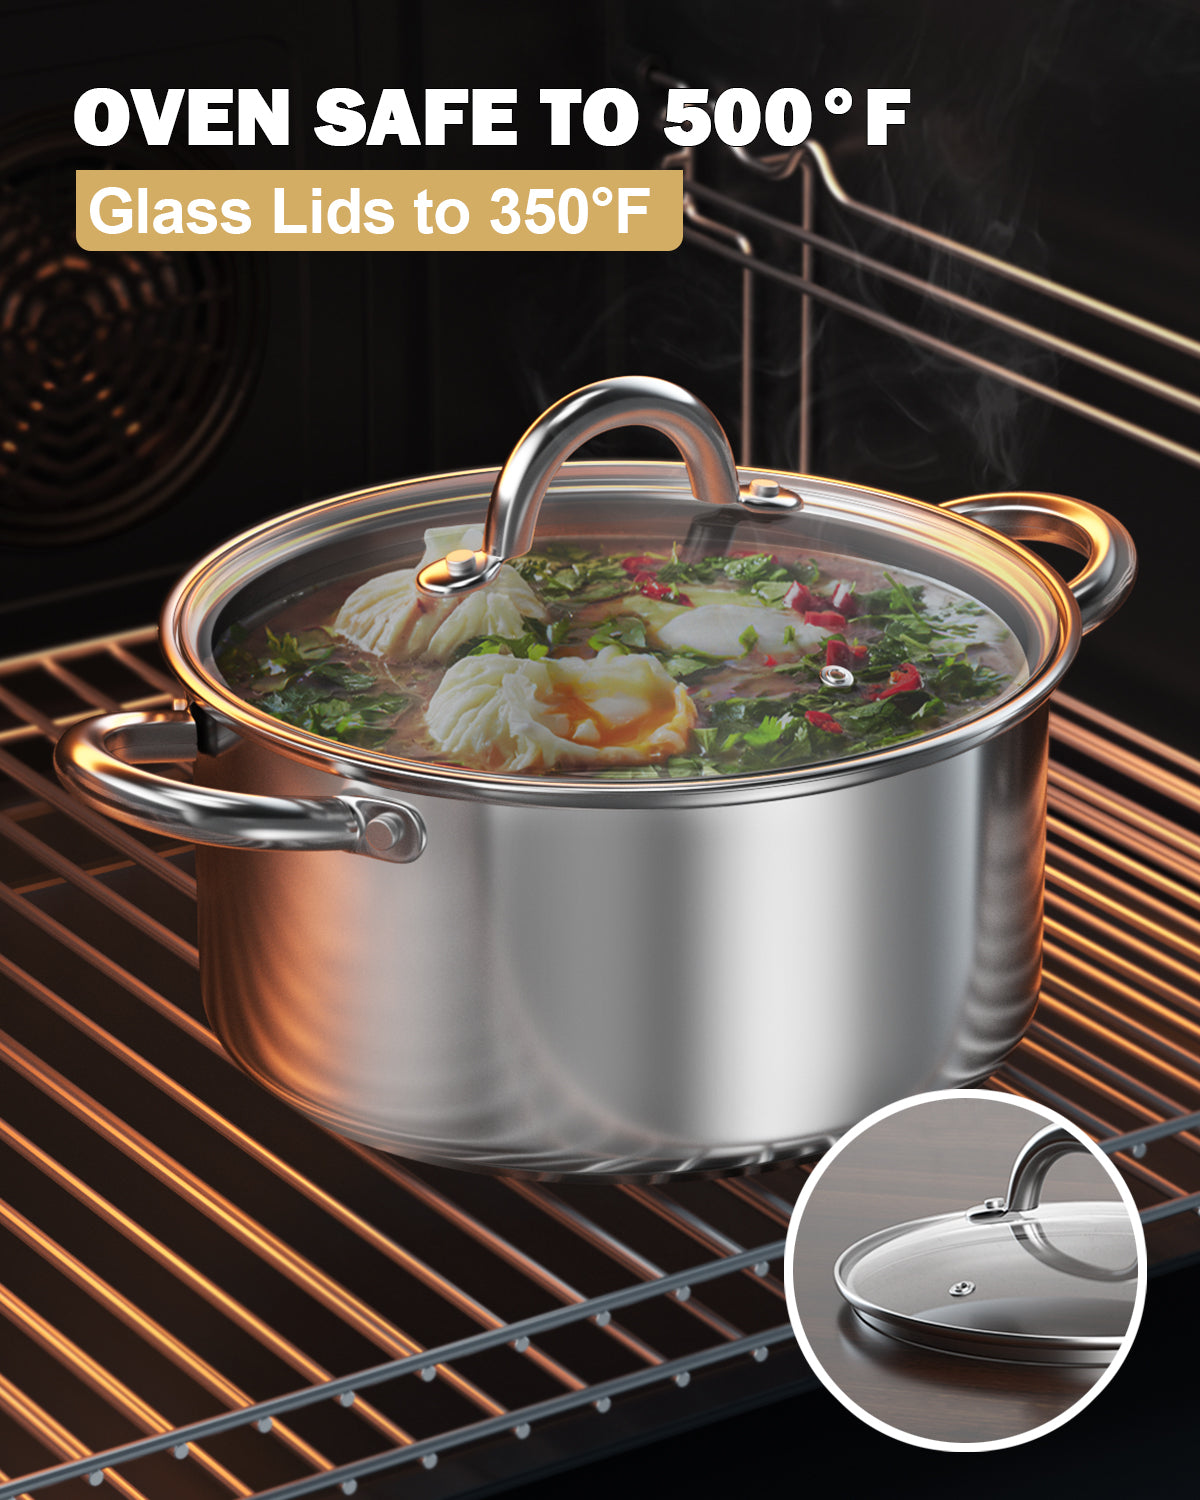 Cook N Home 20 qt. Stainless Steel Stock Pot with Glass Lid NC